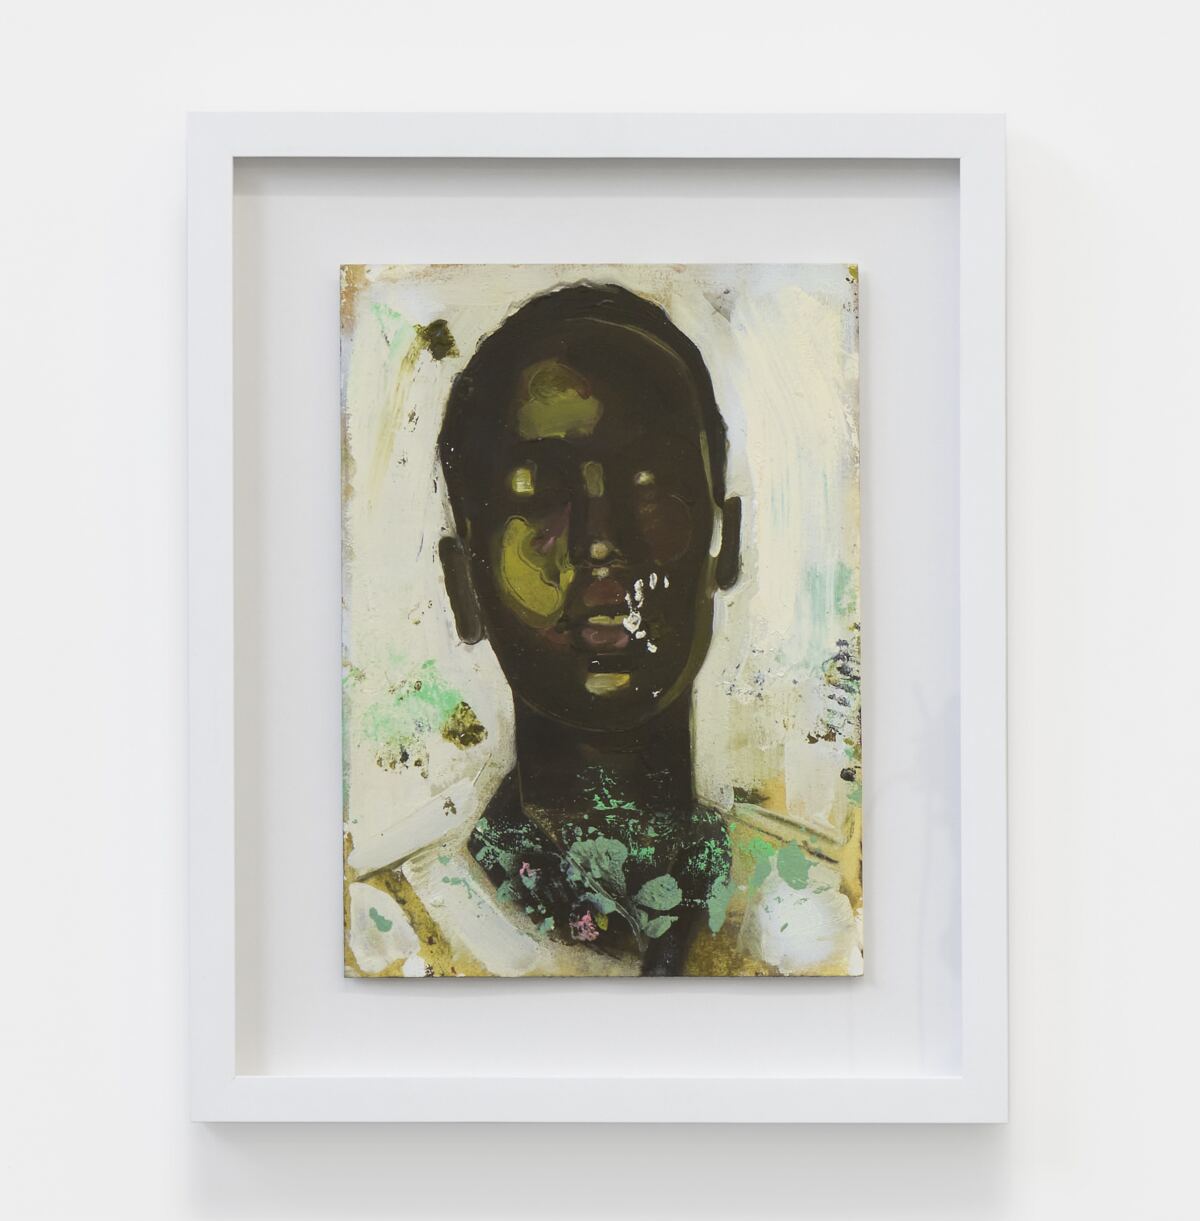 A painting by Devin Johnson shows the face of a Black figure with eyes closed.